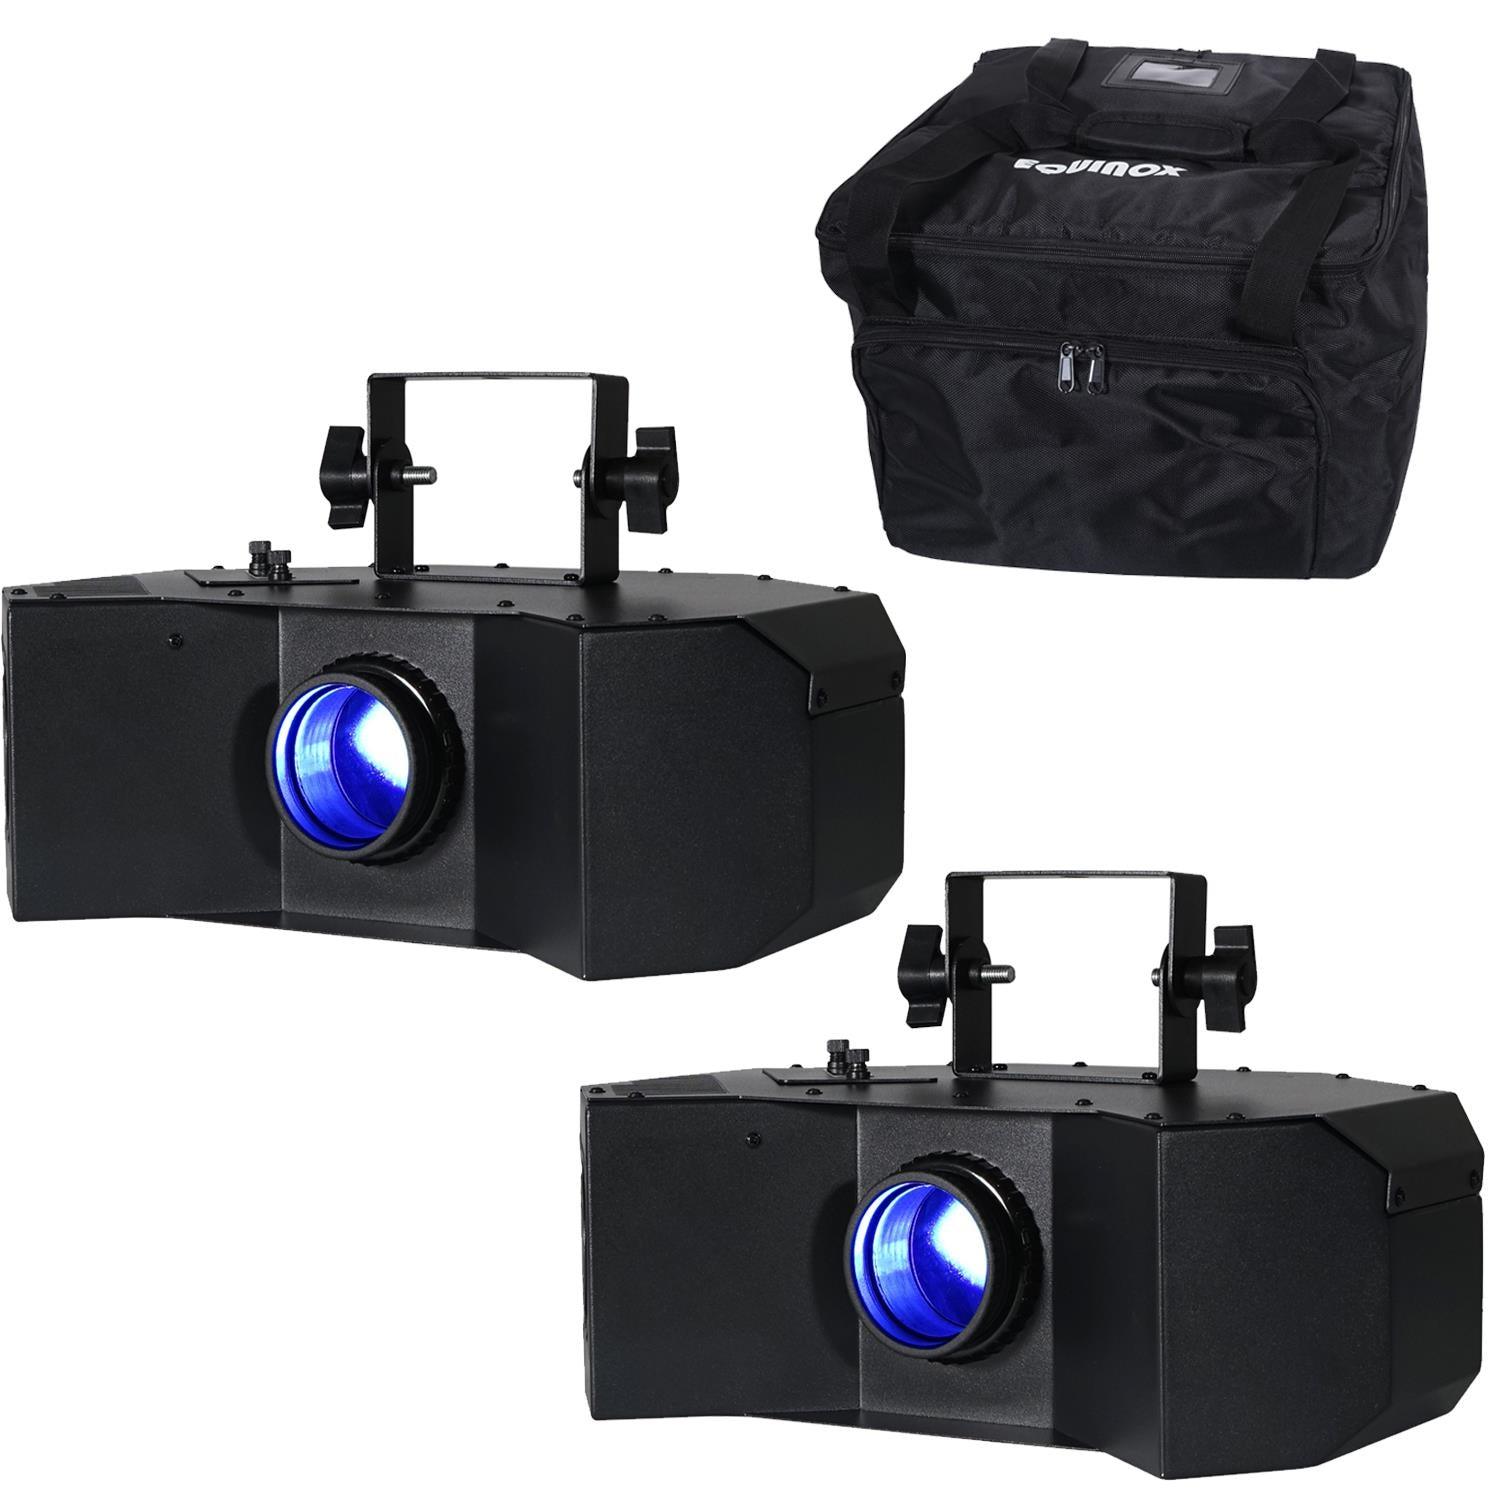 2 x Equinox Helix XP 150w Gobo Flower Black with Carry Bag - DY Pro Audio